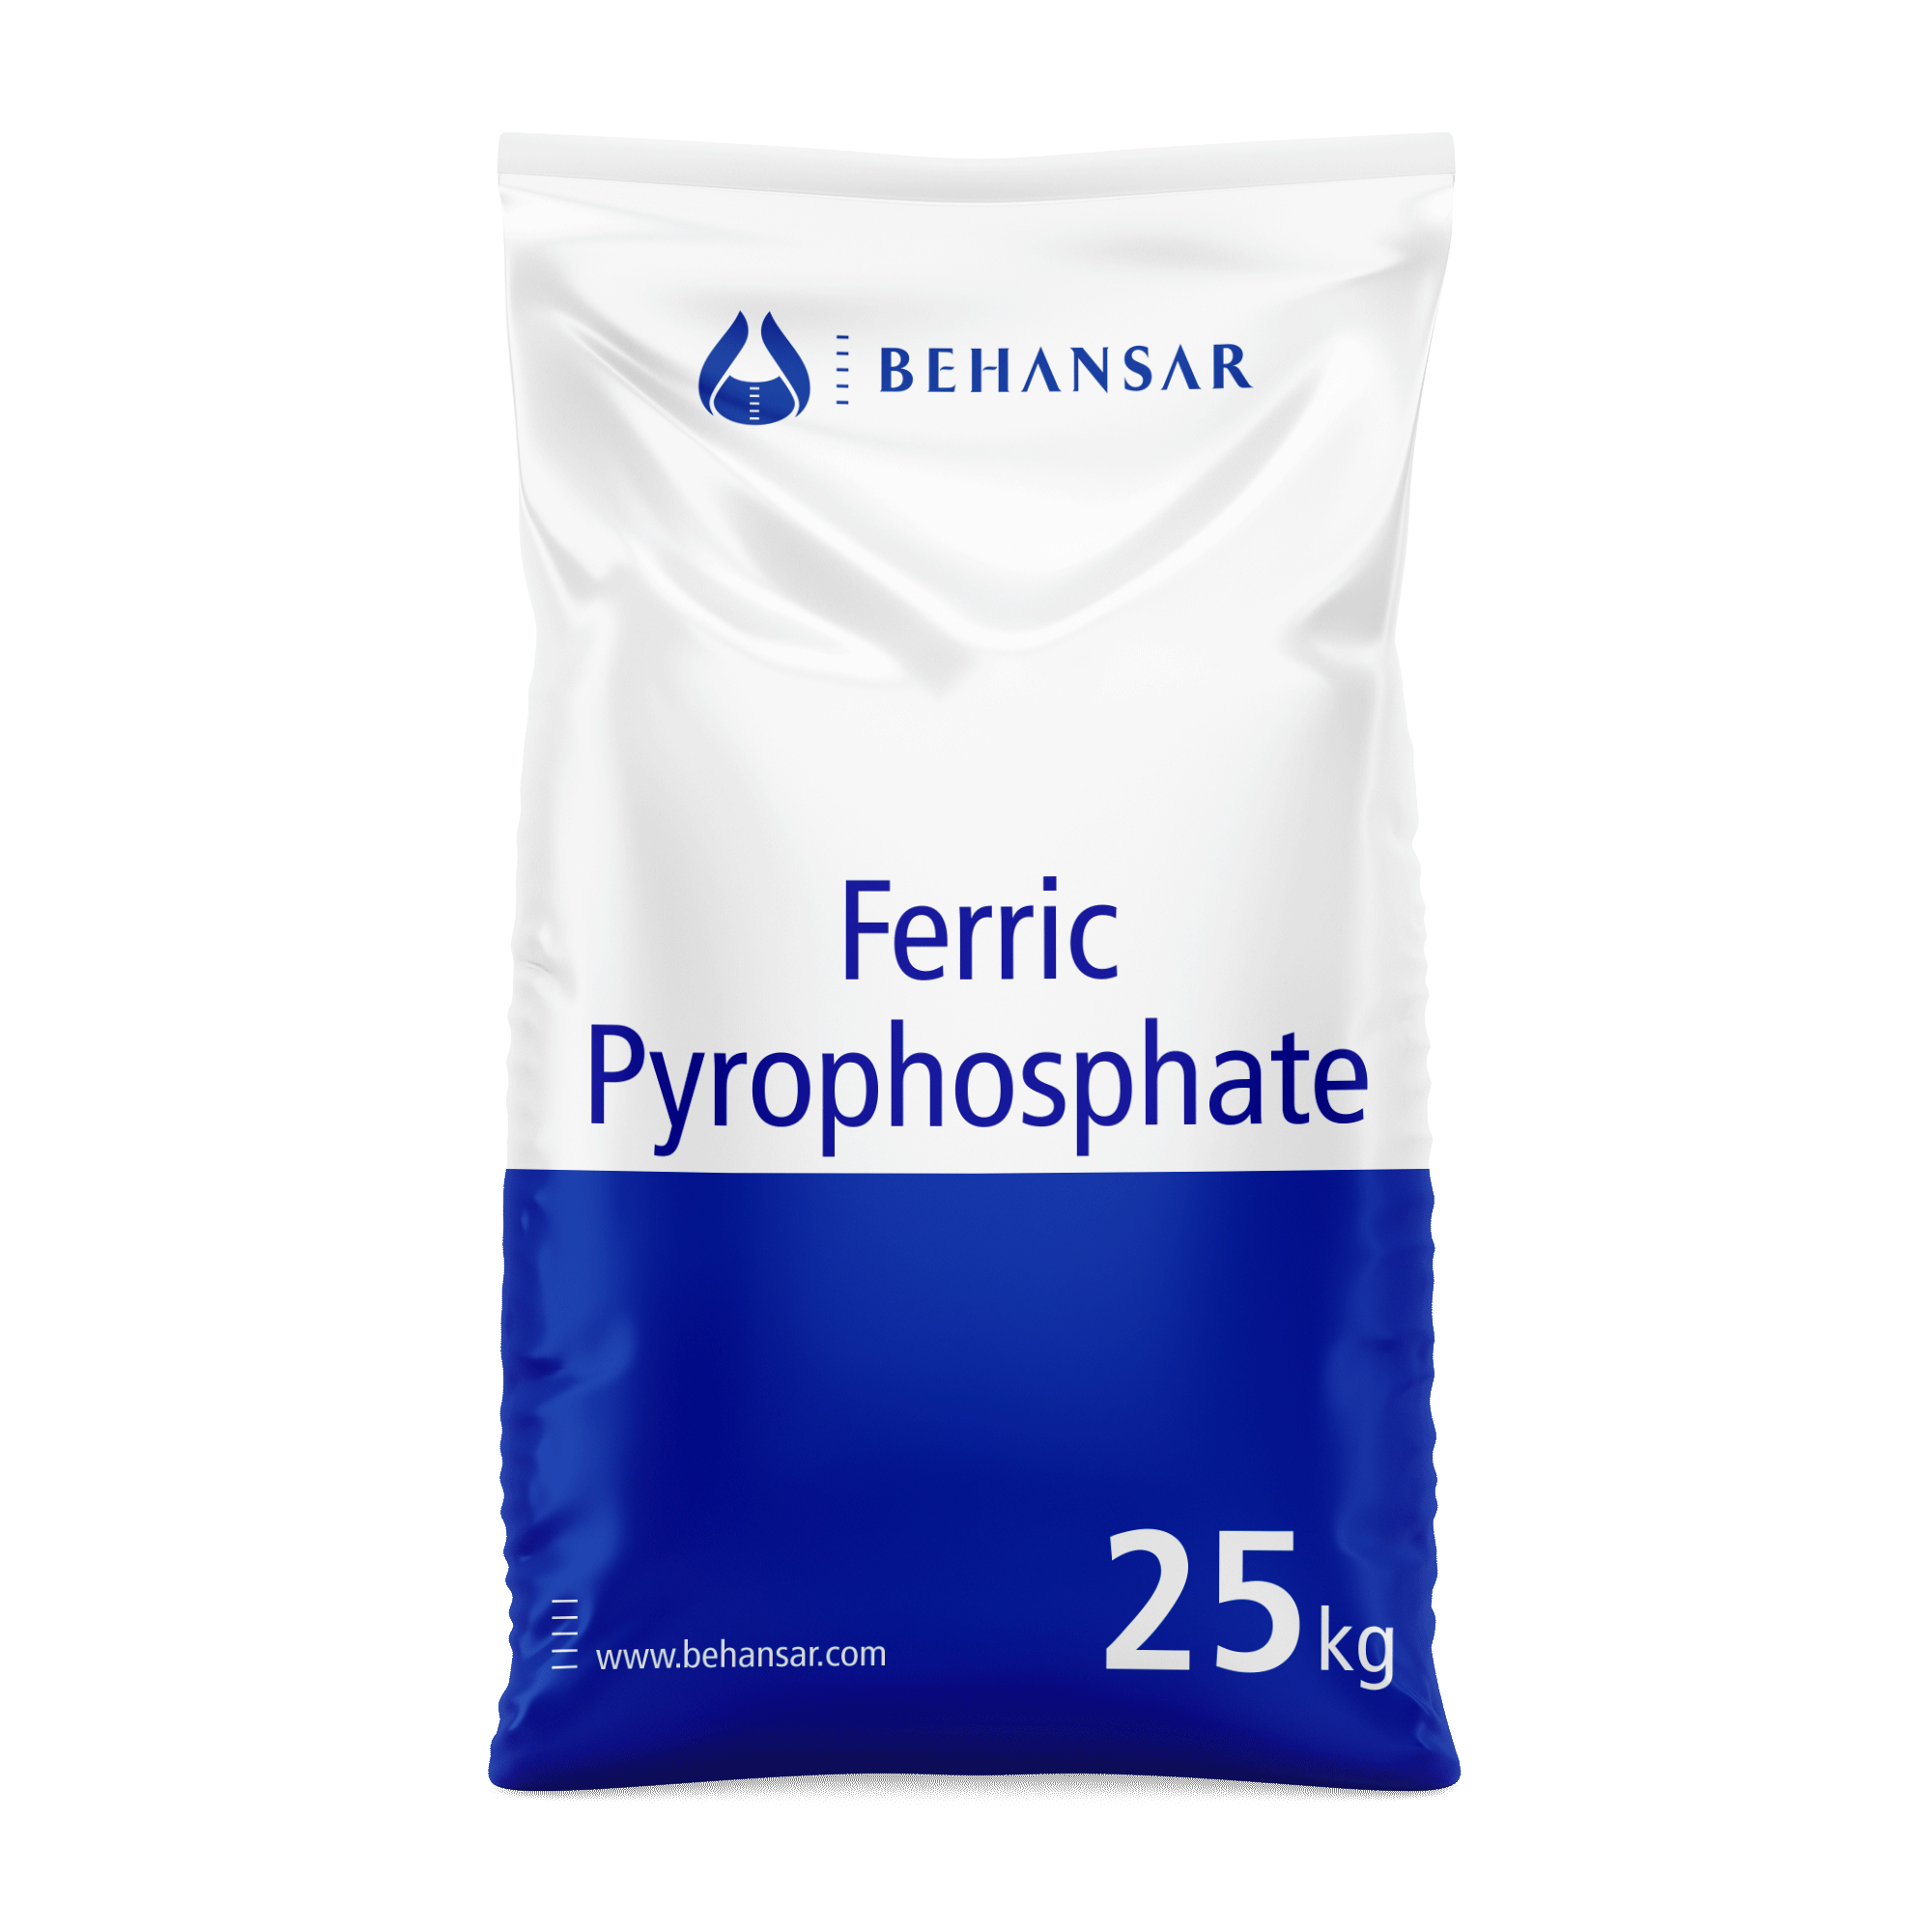 Ferric Pyrophosphate is one of the products of Behansar Co